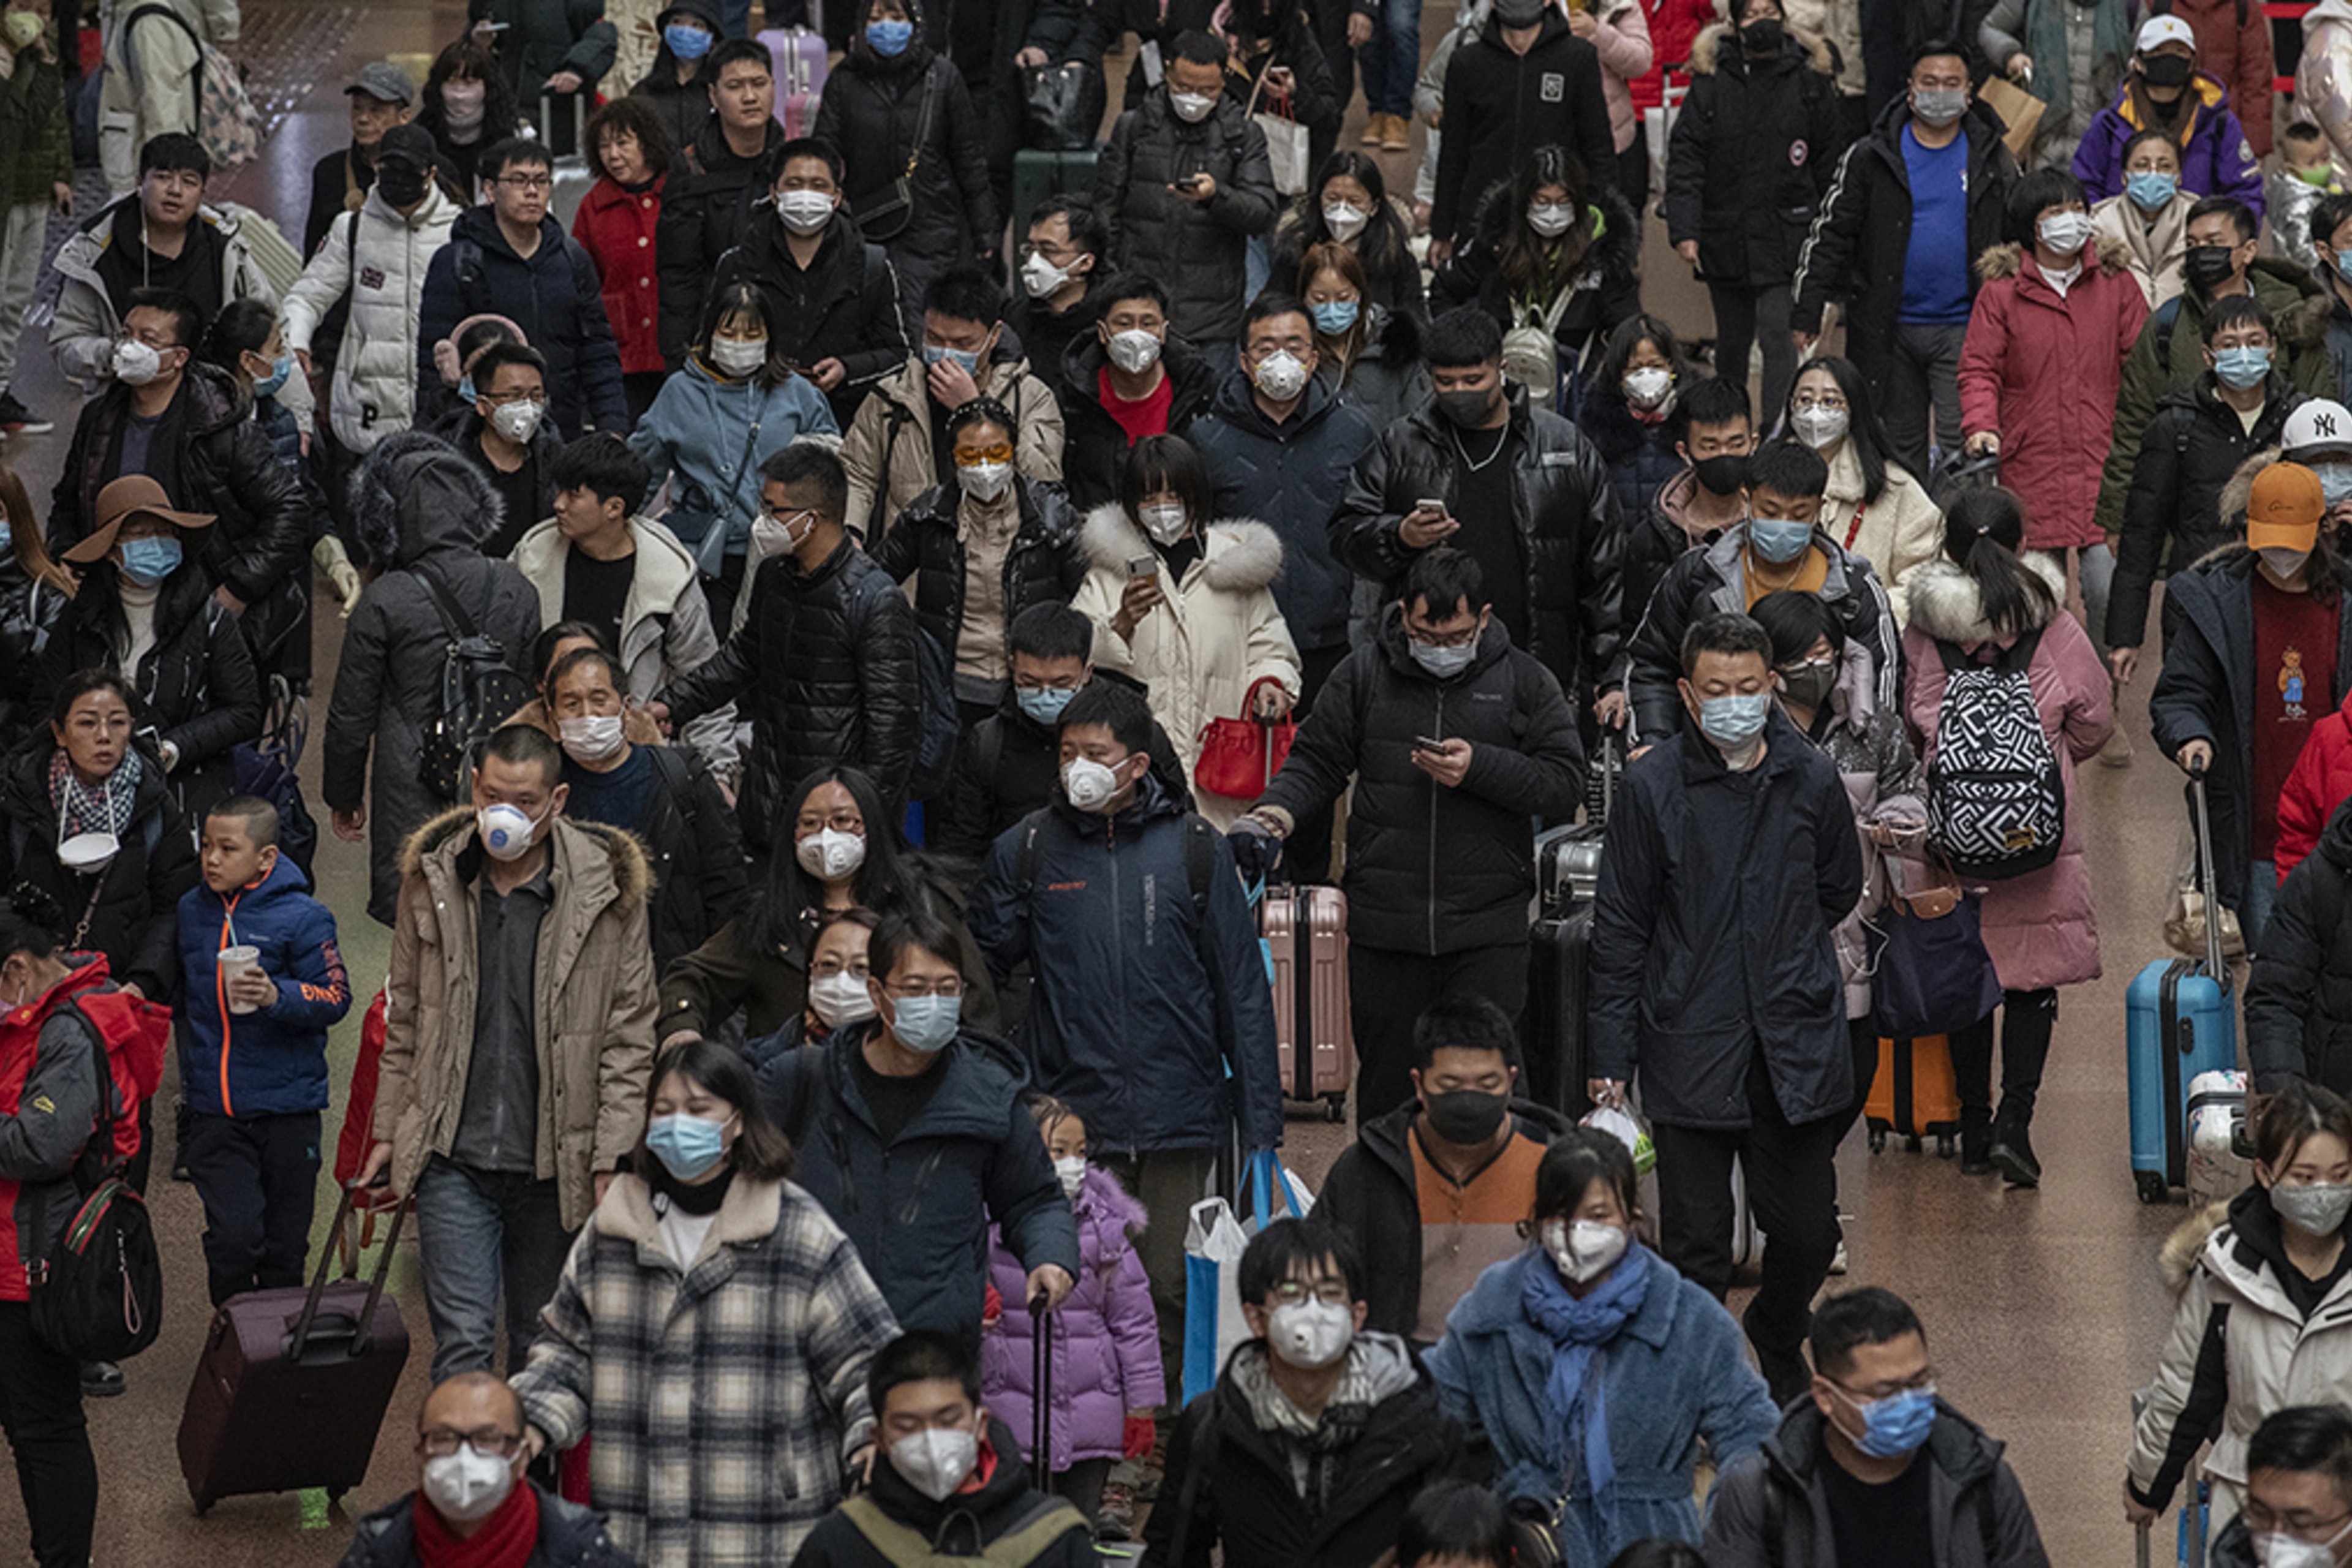 Chinese passengers arrive at a Beijing railway station amid the coronavirus outbreak.